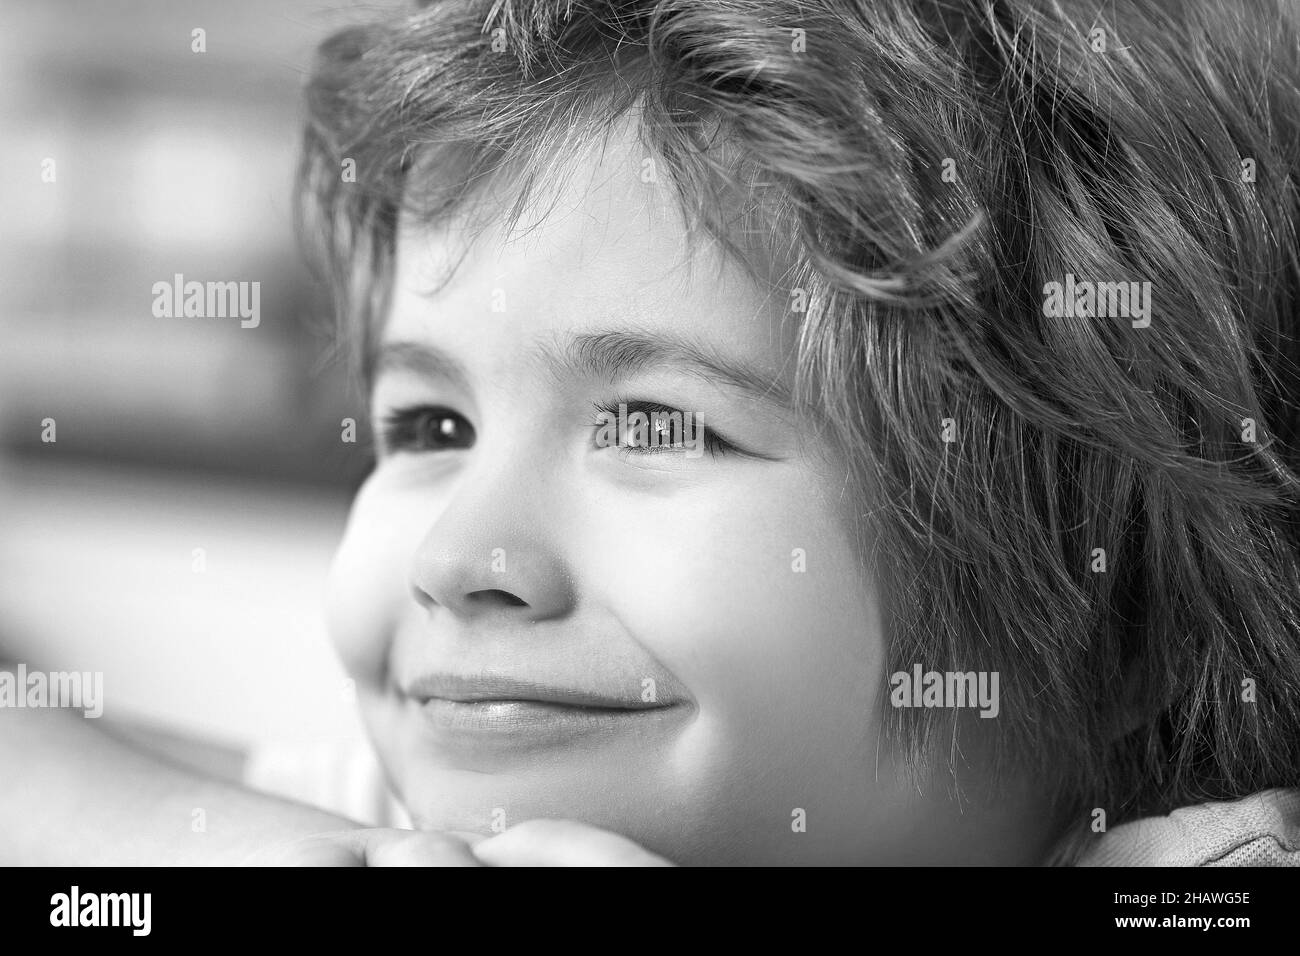 Beautiful little child with red hair smiling close up portrait. Stock Photo